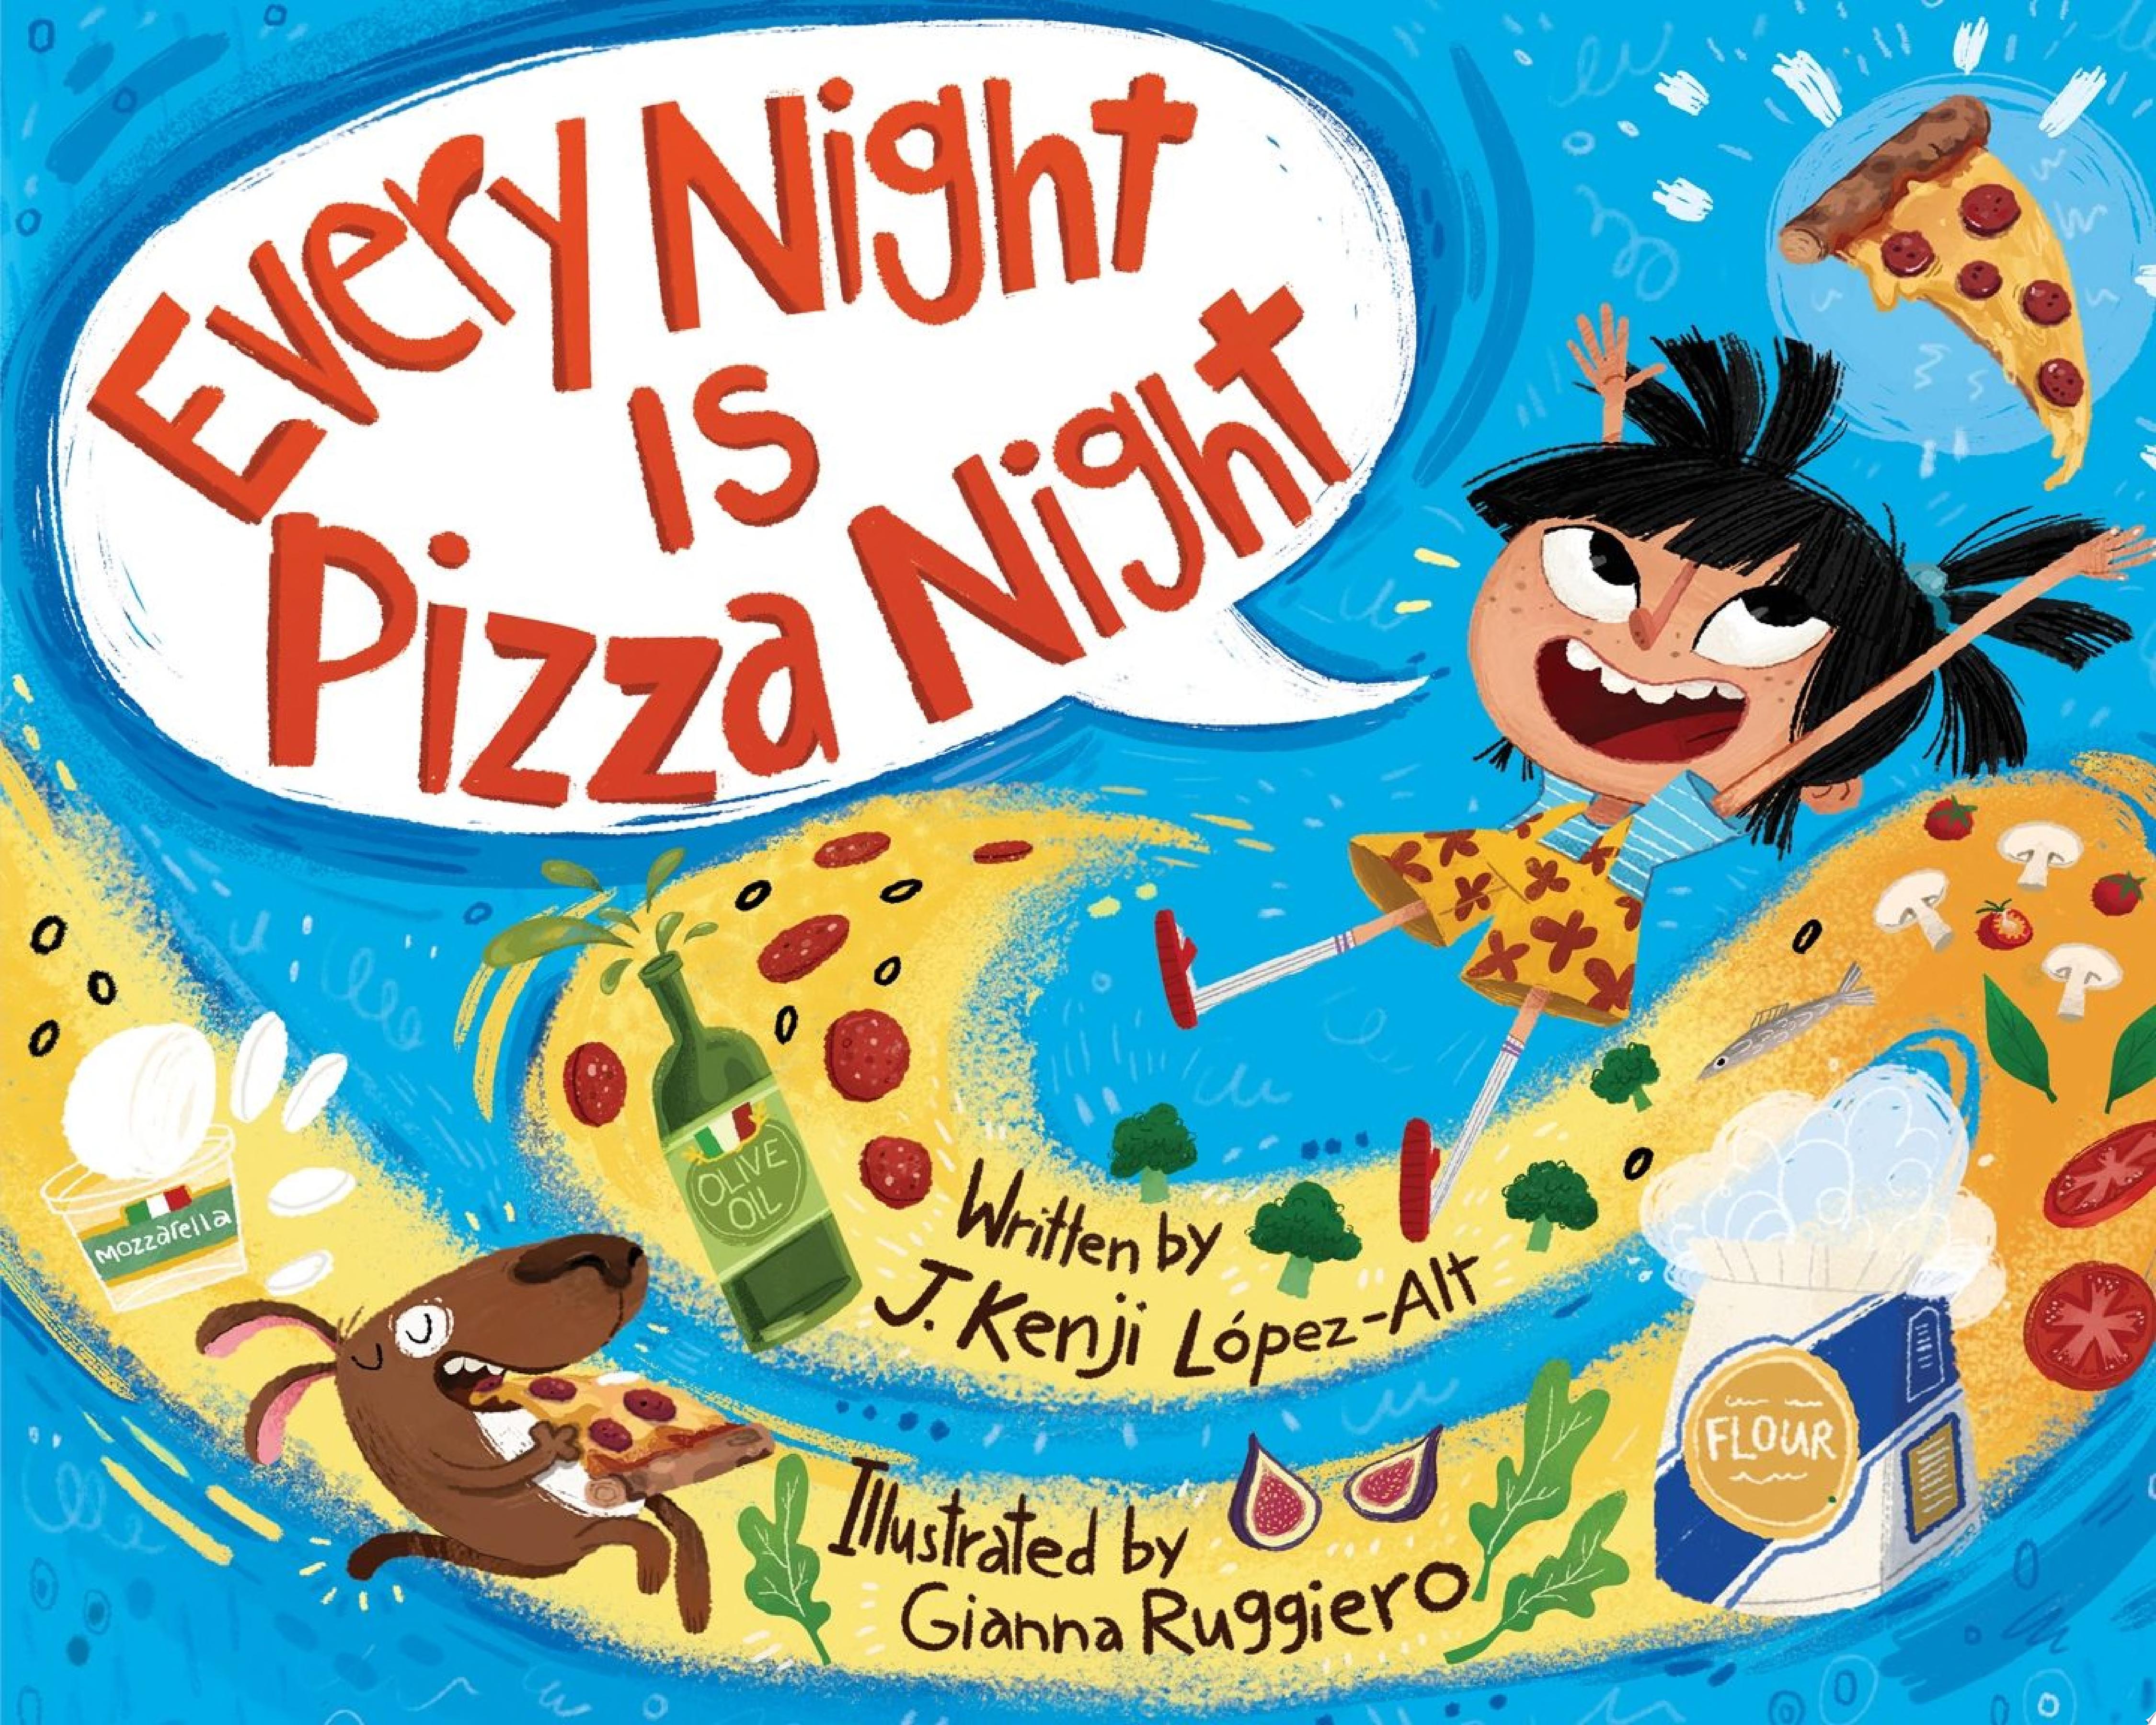 Image for "Every Night Is Pizza Night"